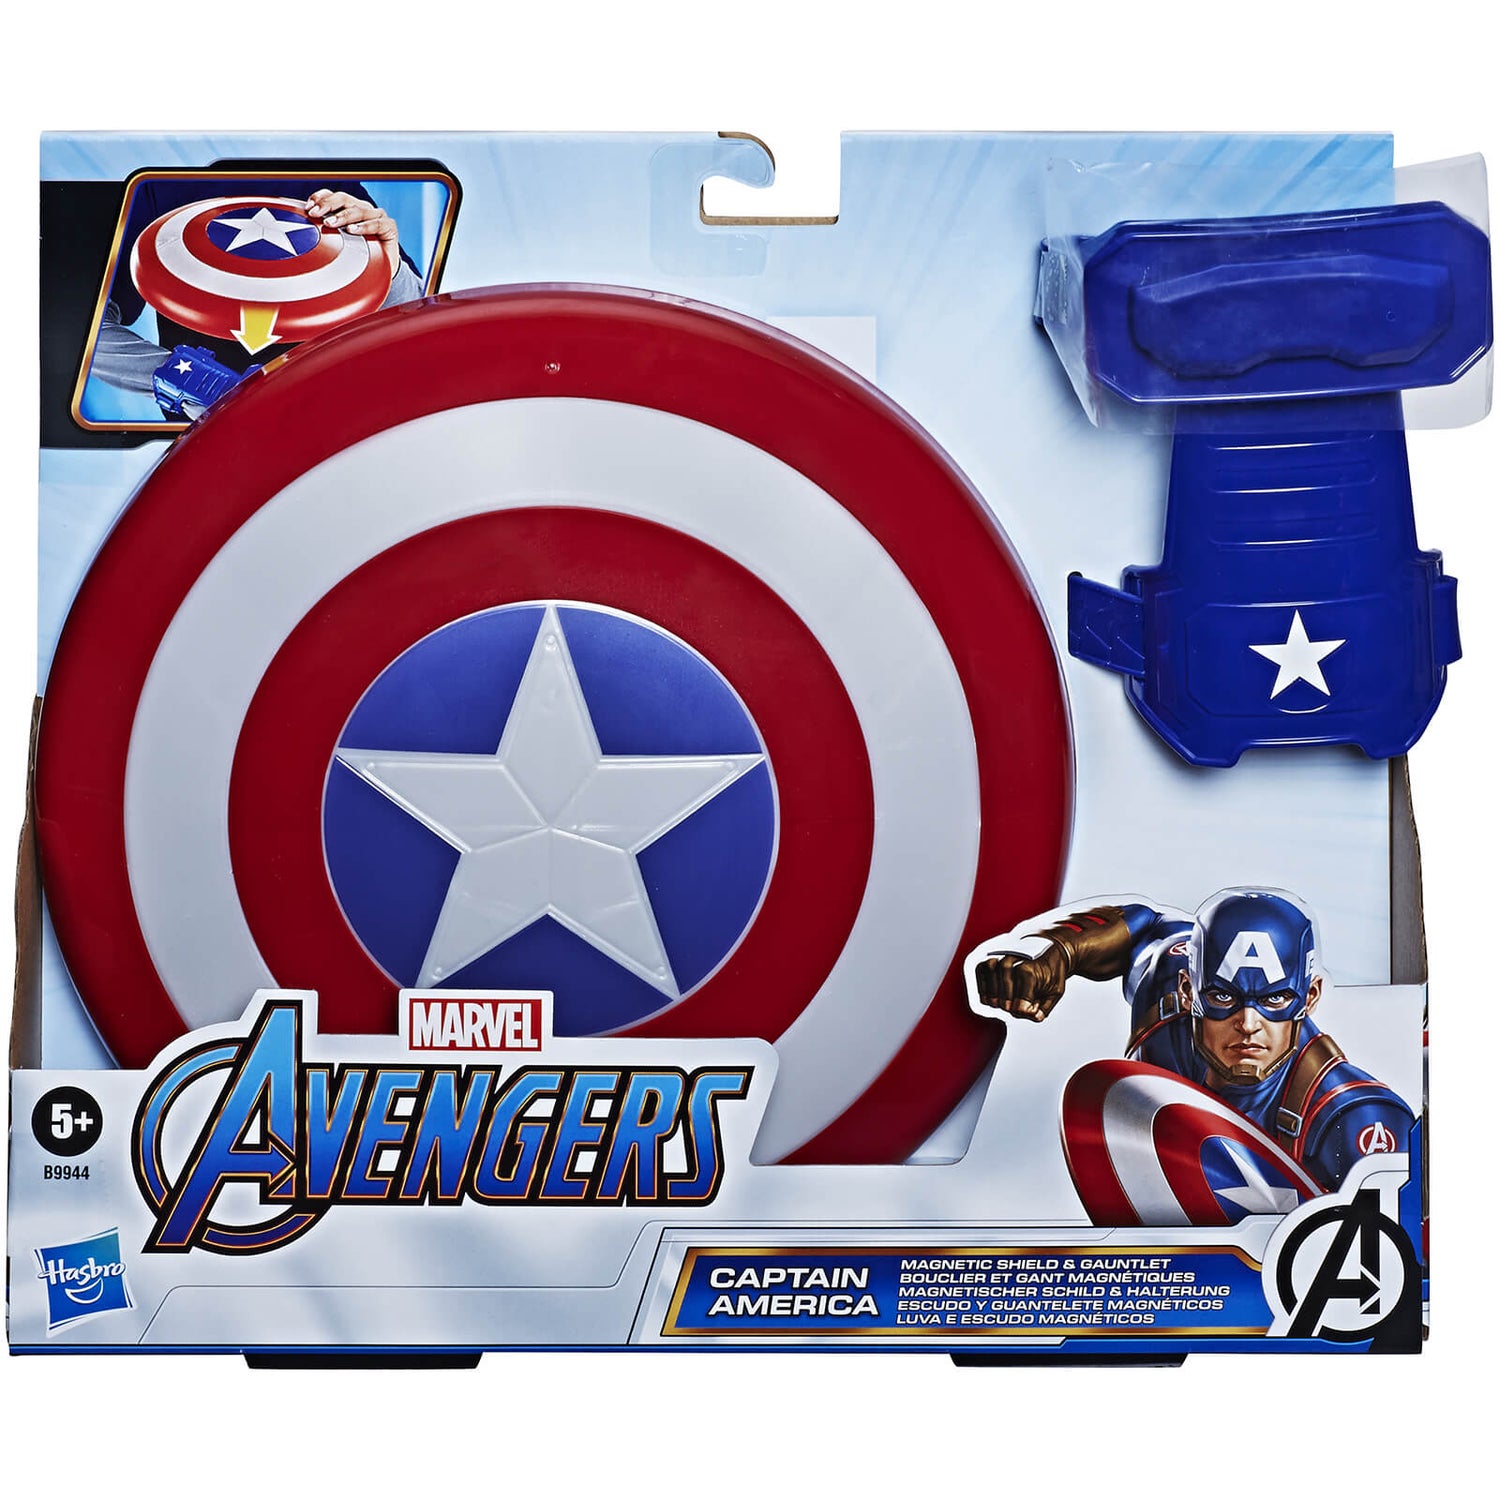 Hasbro Marvel Avengers - Captain America Magnetic Shield and Gauntlet